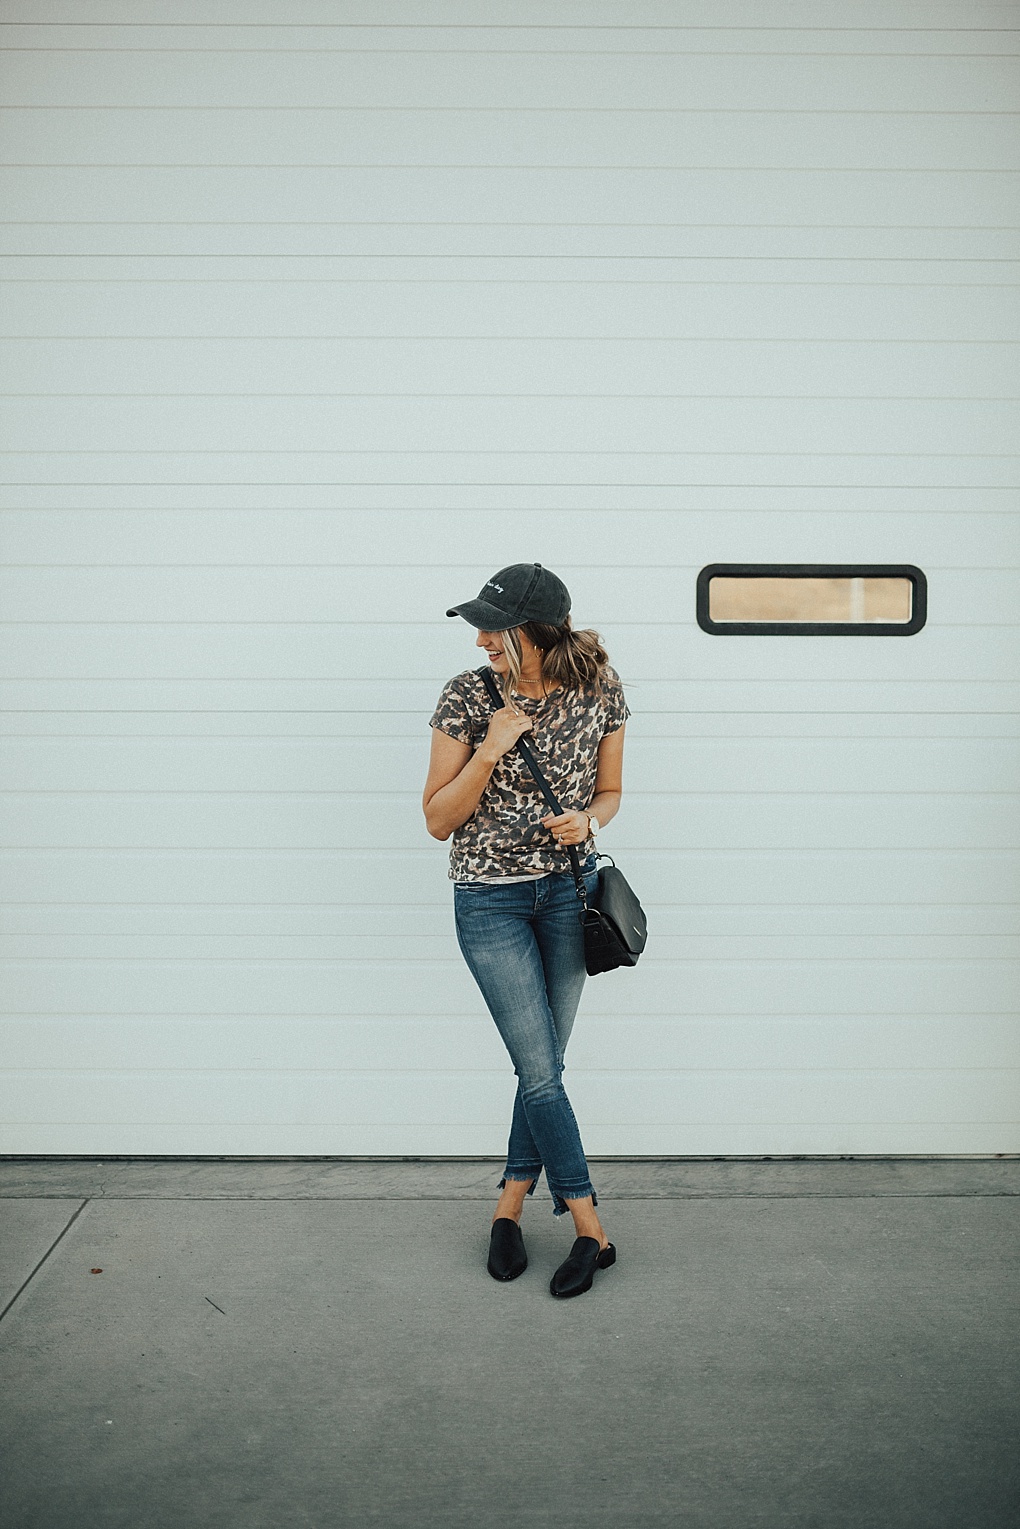 The Momiform (Casual Mom Outfit) I'll Be Living In This Fall by Utah fashion blogger Dani Marie